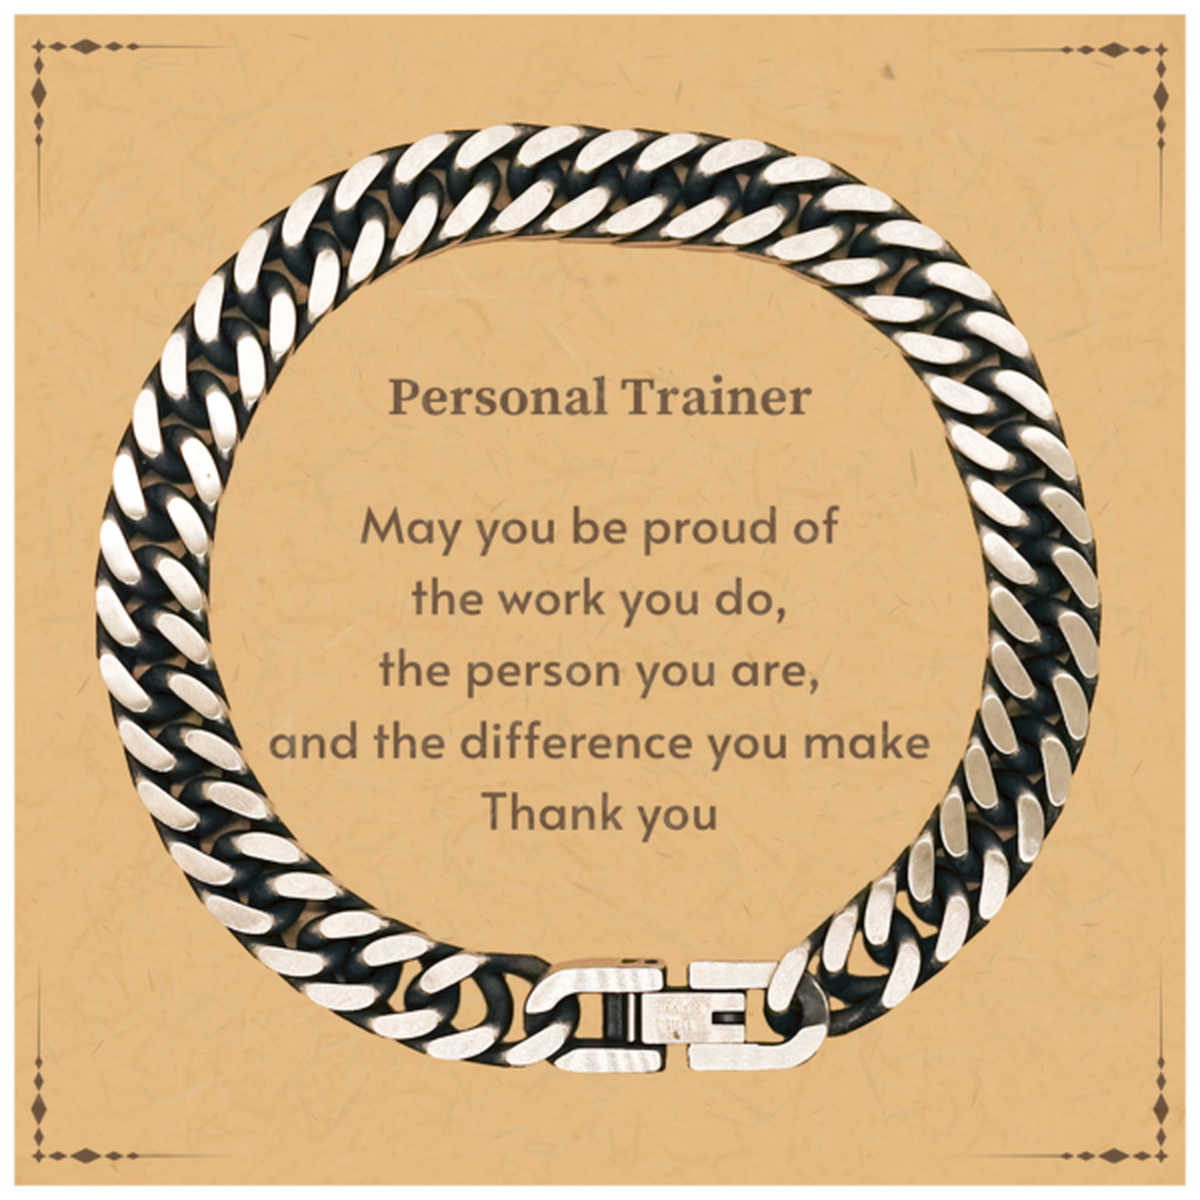 Heartwarming Cuban Link Chain Bracelet Retirement Coworkers Gifts for Personal Trainer, Personal Trainer May You be proud of the work you do, the person you are Gifts for Boss Men Women Friends